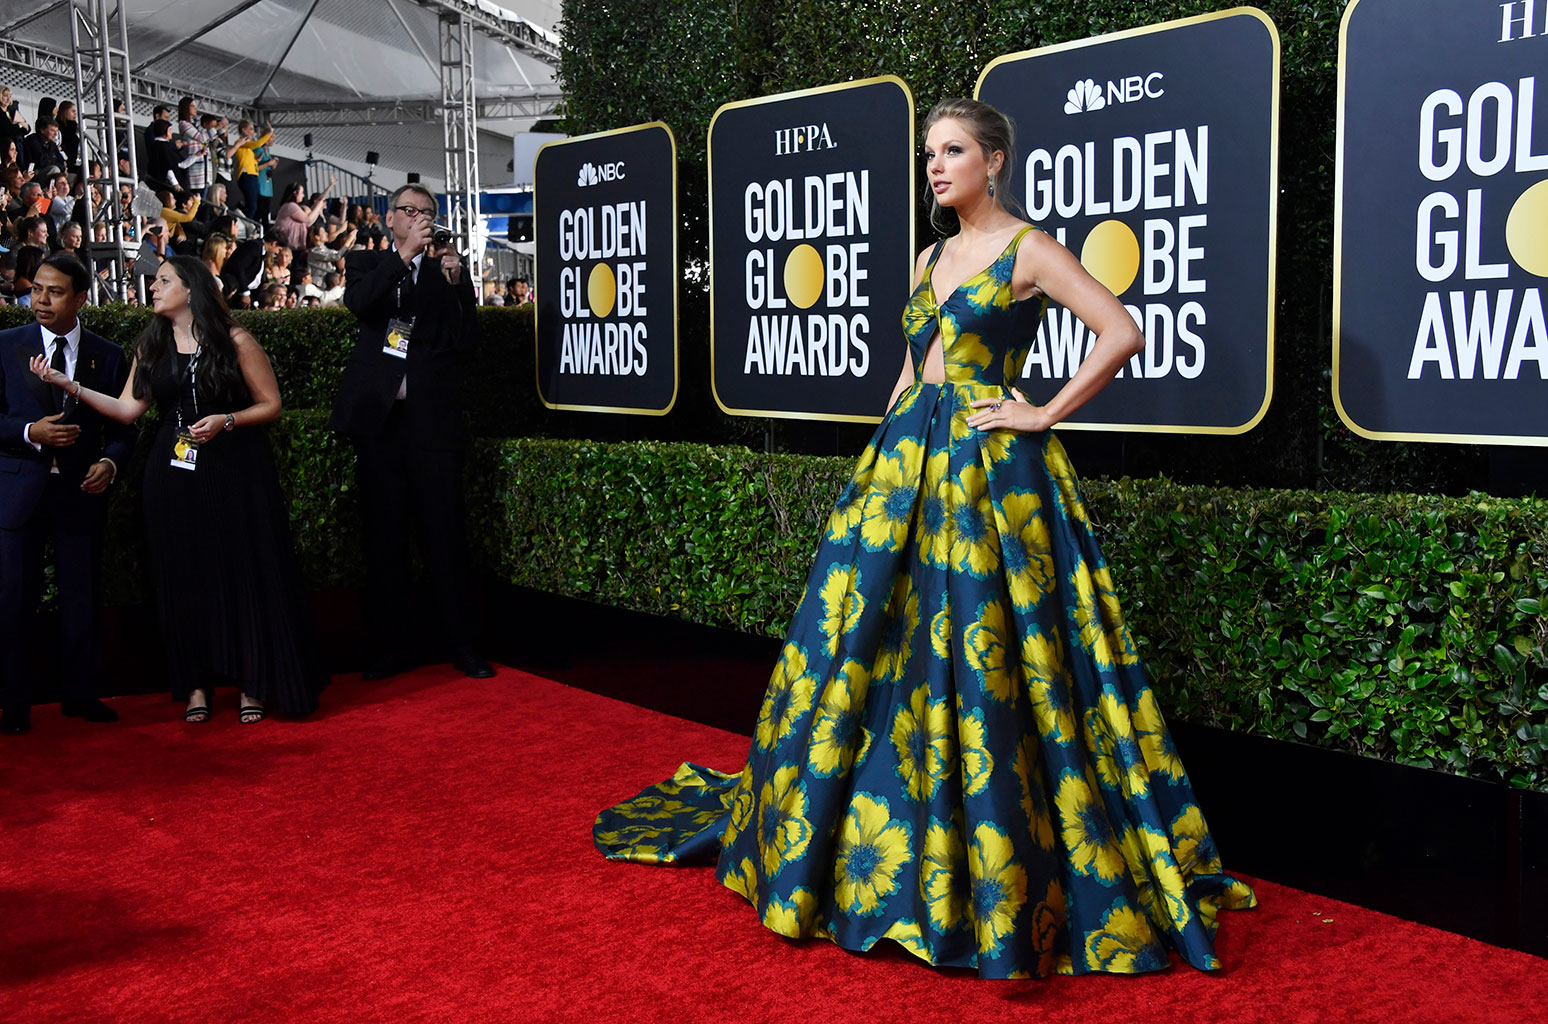 Taylor Swift Graces the Red Carpet in a Floral Gown at the 2020 Golden Globes - www.billboard.com